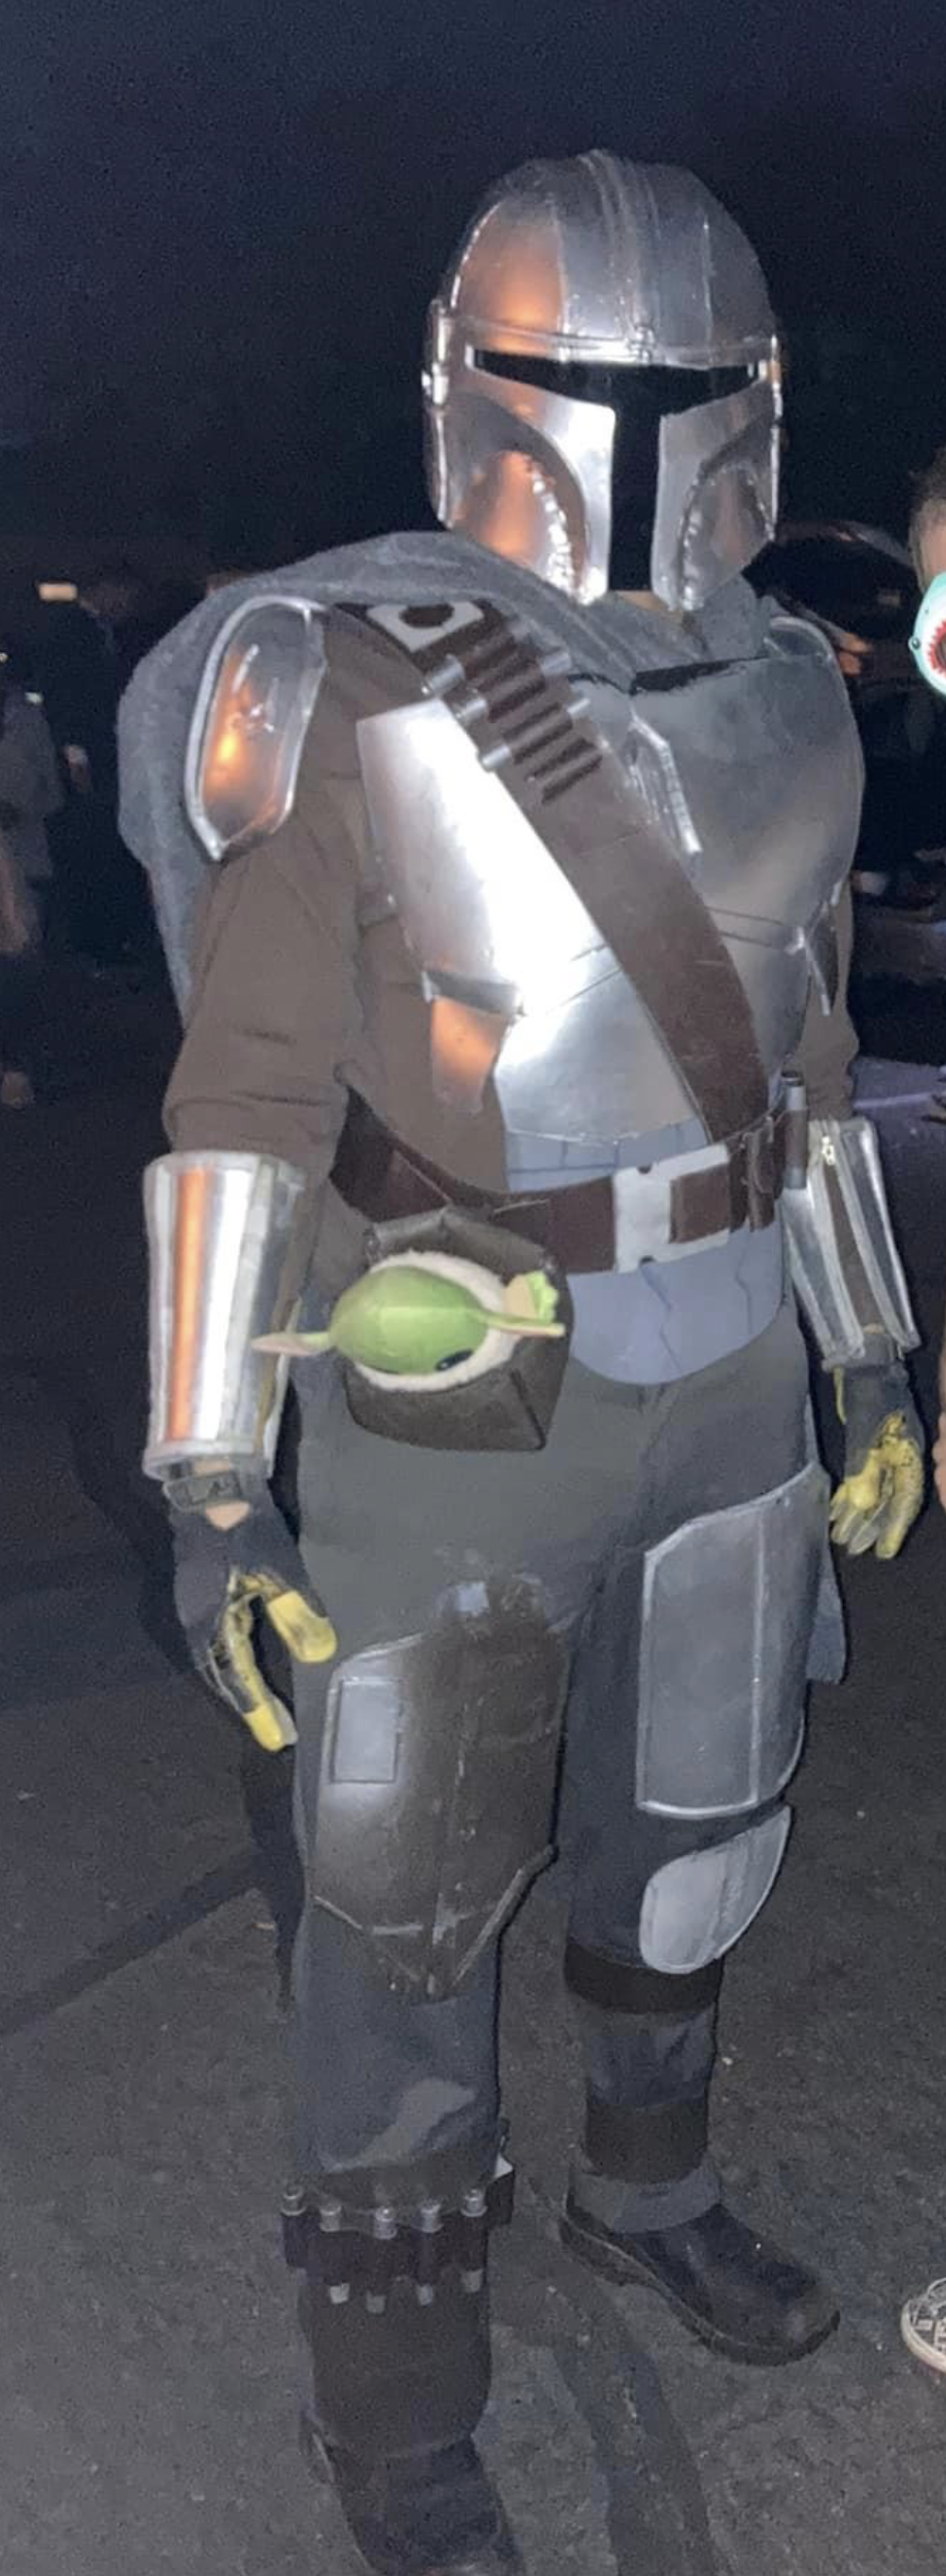 Stephen Dressed up as The Mandalorian